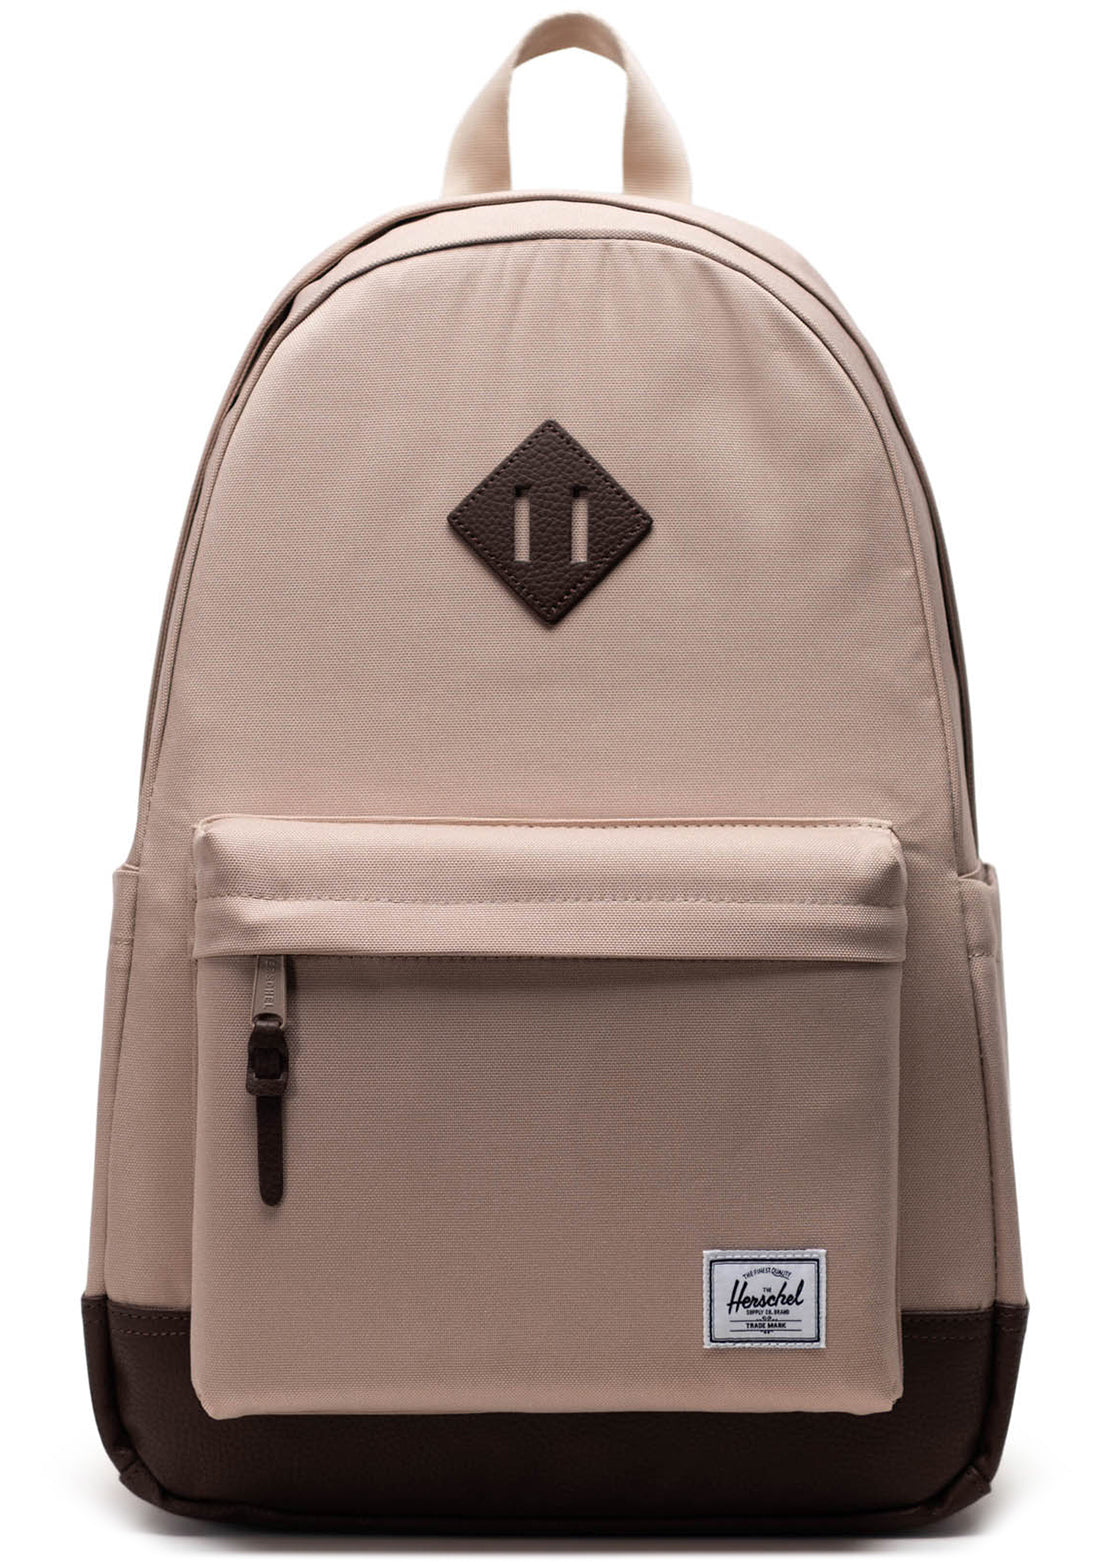 Herschel Heritage Backpack Light Taupe/Chicory Coffee